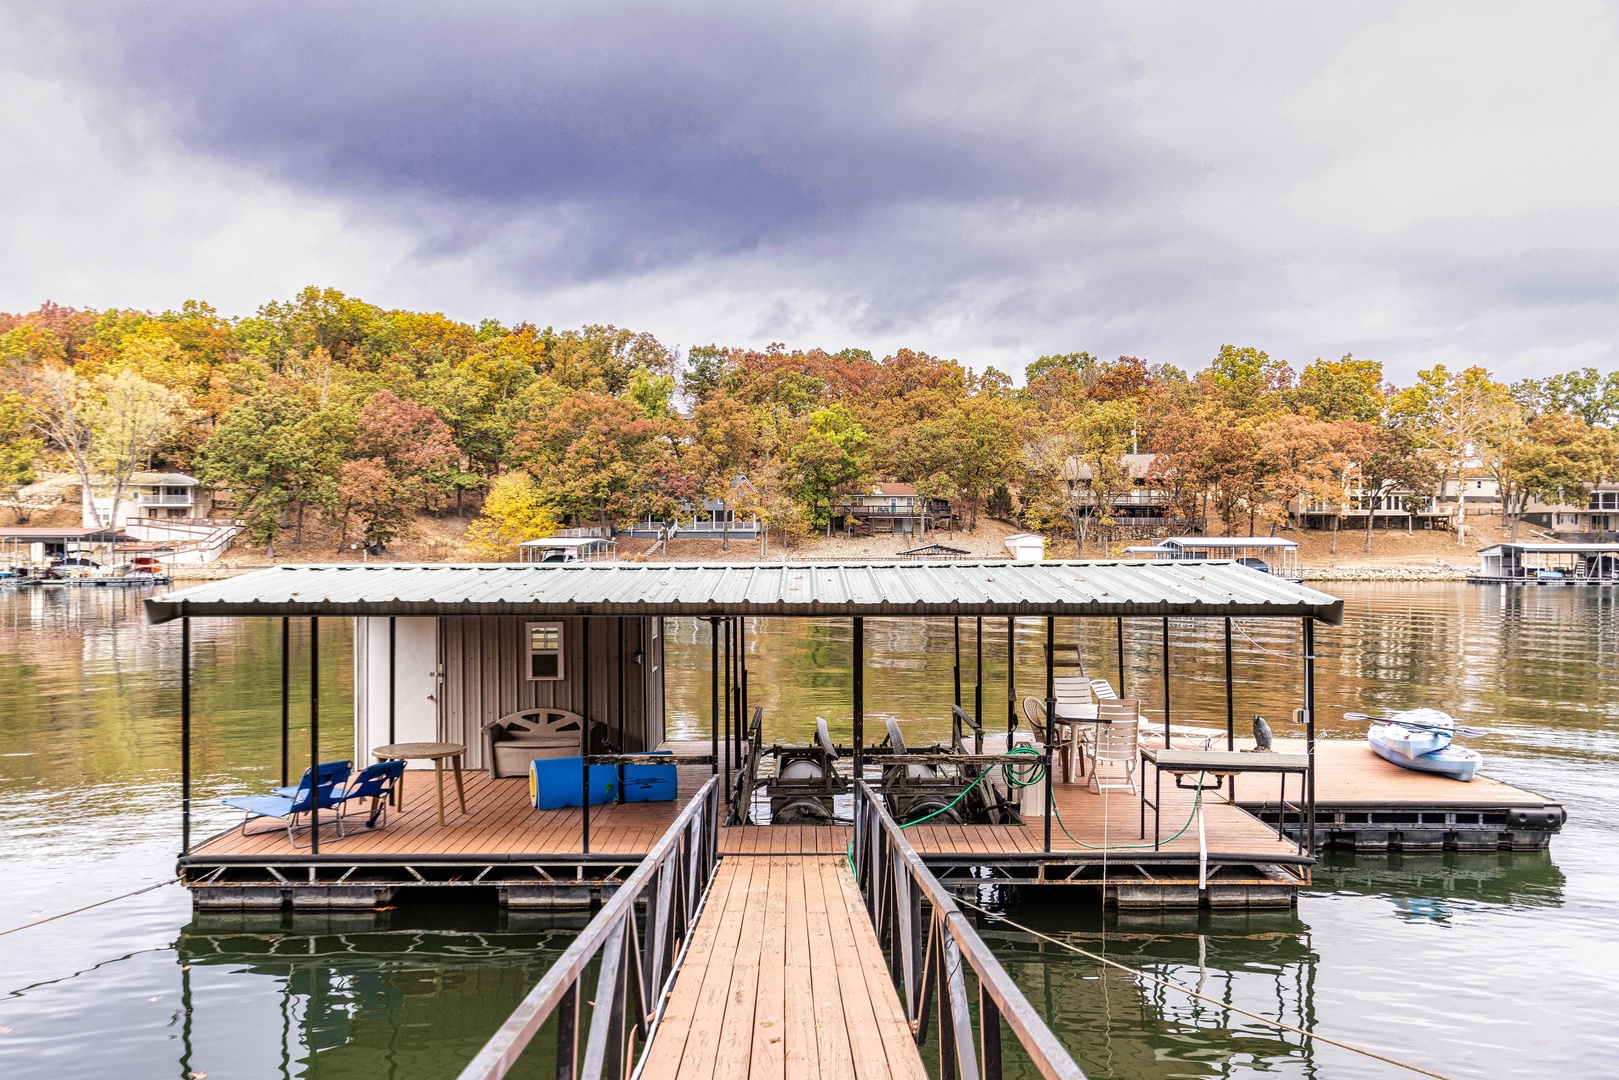 Enjoy time on the spacious private dock